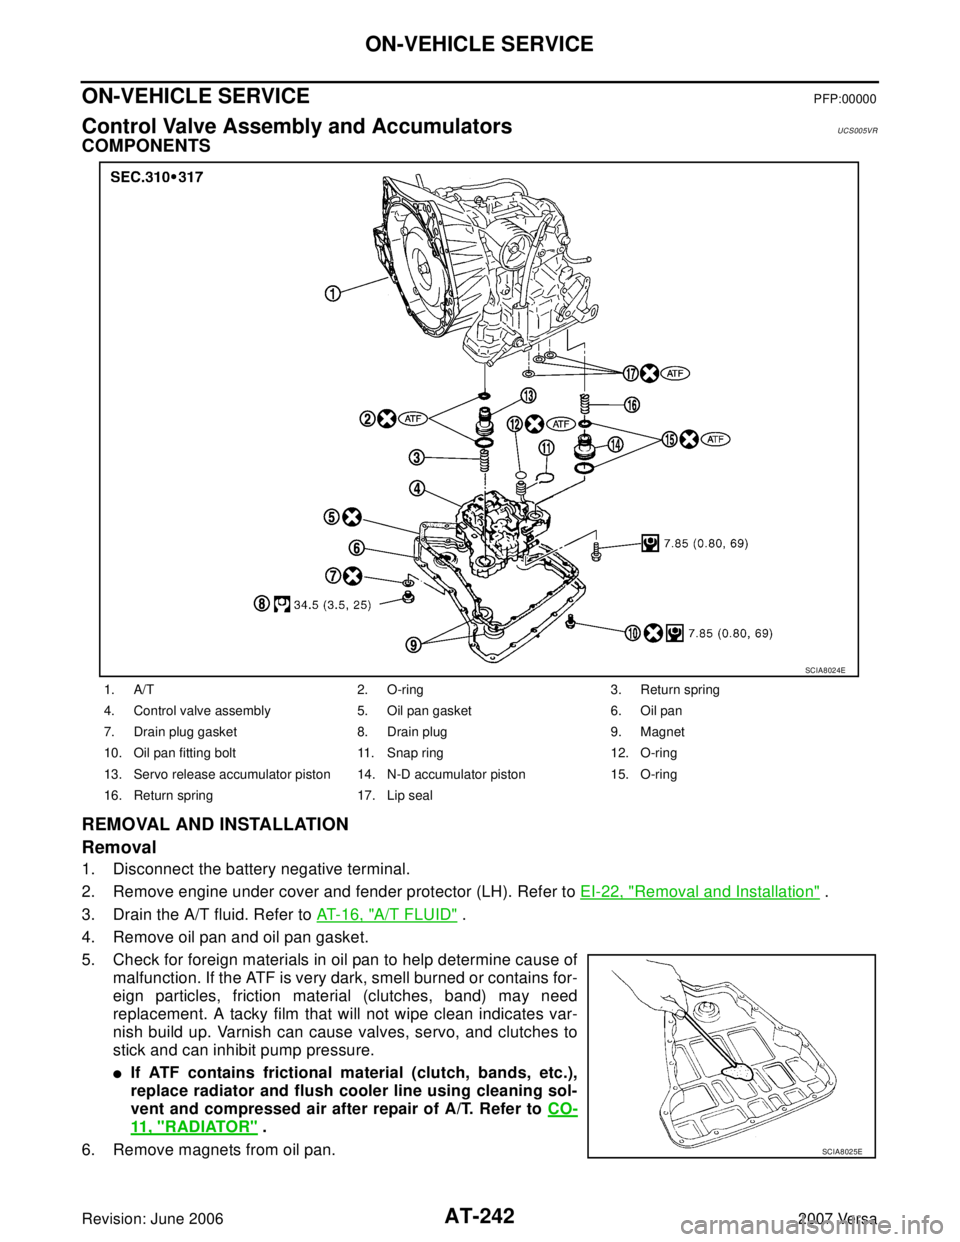 NISSAN TIIDA 2007  Service Repair Manual AT-242
ON-VEHICLE SERVICE
Revision: June 20062007 Versa
ON-VEHICLE SERVICEPFP:00000
Control Valve Assembly and AccumulatorsUCS005VR
COMPONENTS
REMOVAL AND INSTALLATION
Removal
1. Disconnect the batter